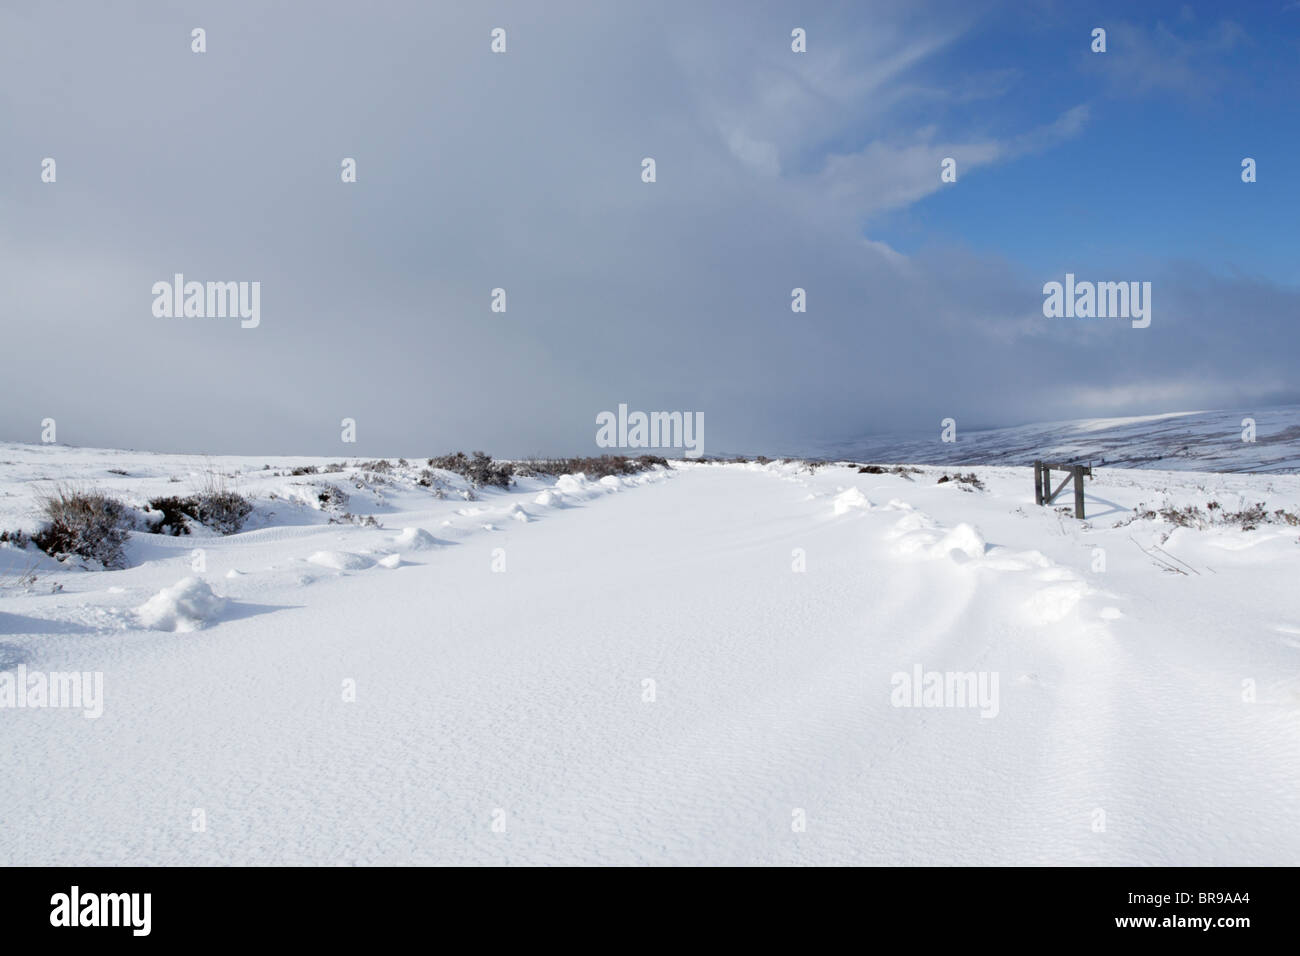 Snow covered road on Kildlae Moor in North York Moors national park with a snow storm approaching Stock Photo